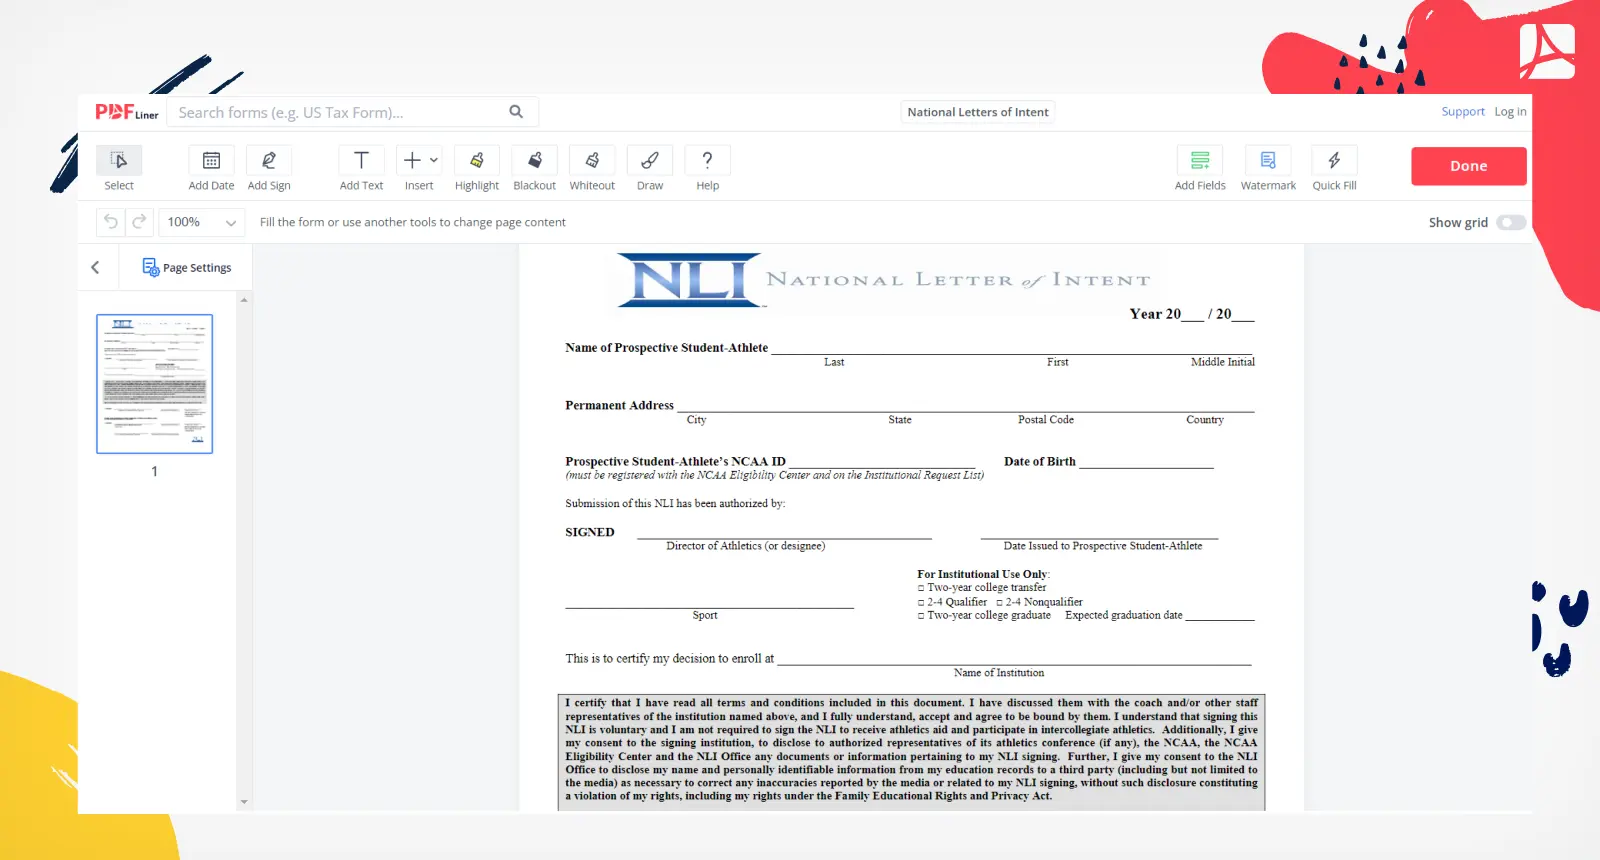 National Letters of Intent Form Screenshot